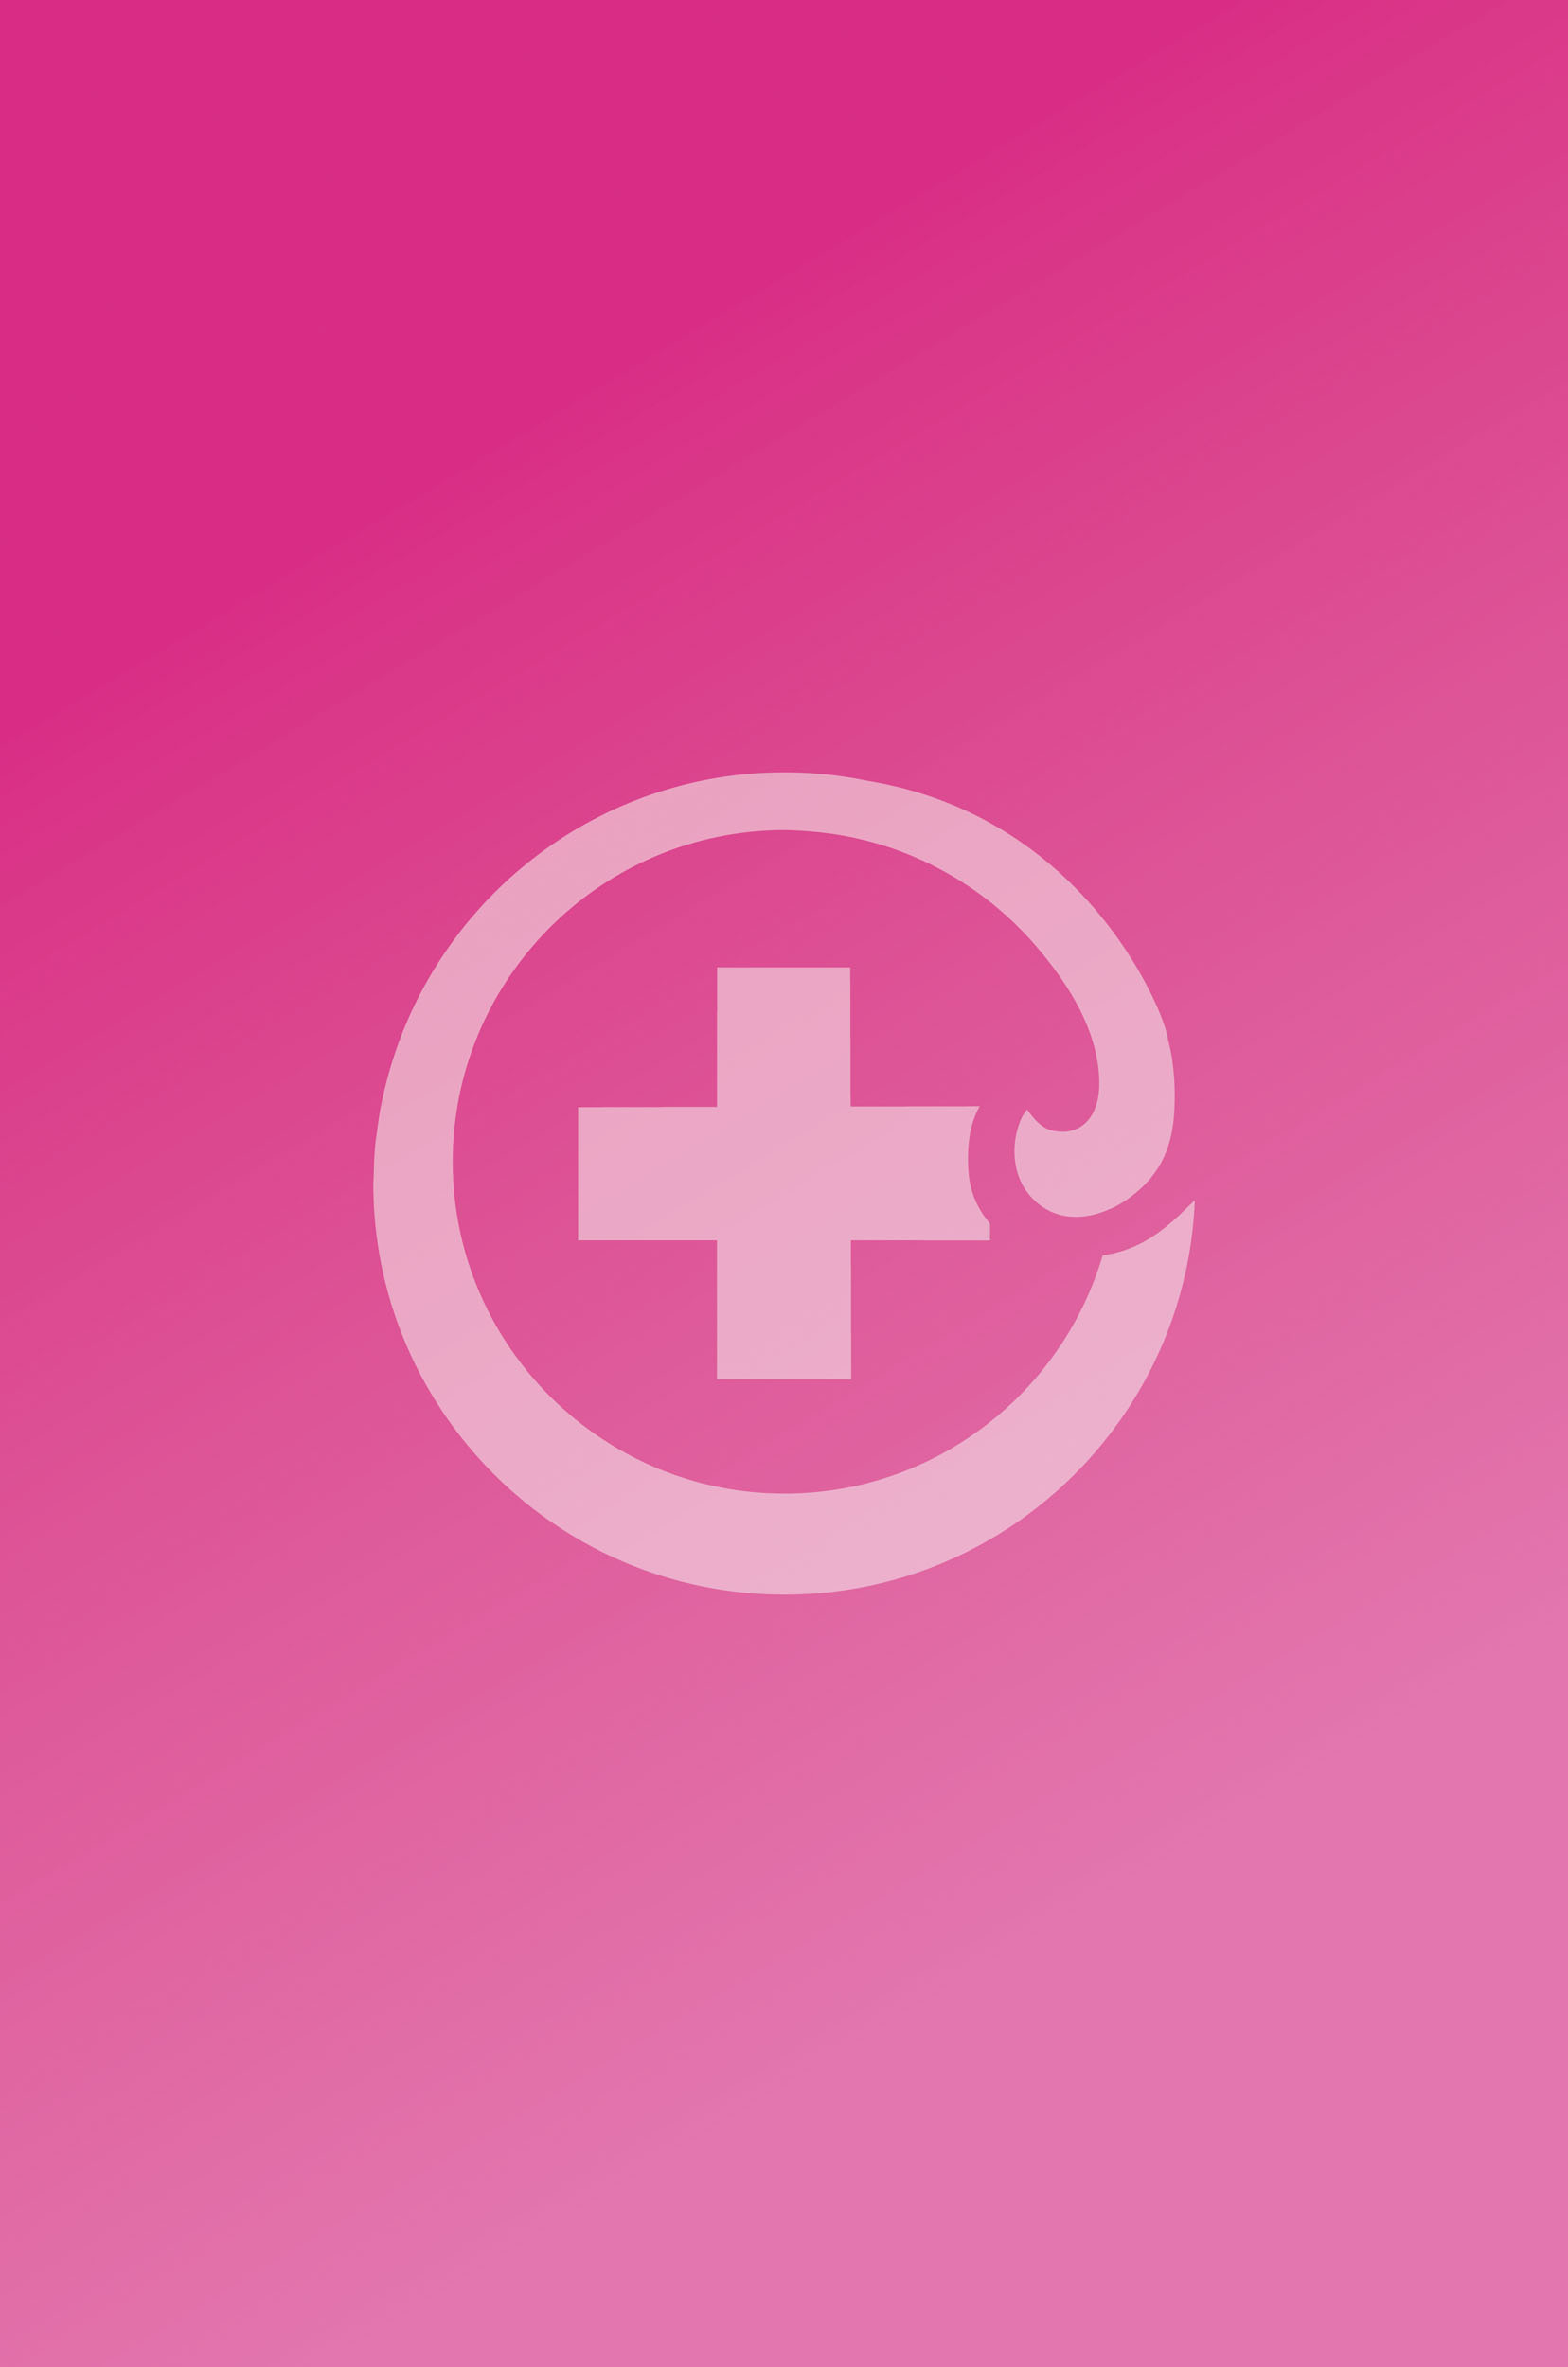 Employee placeholder pink